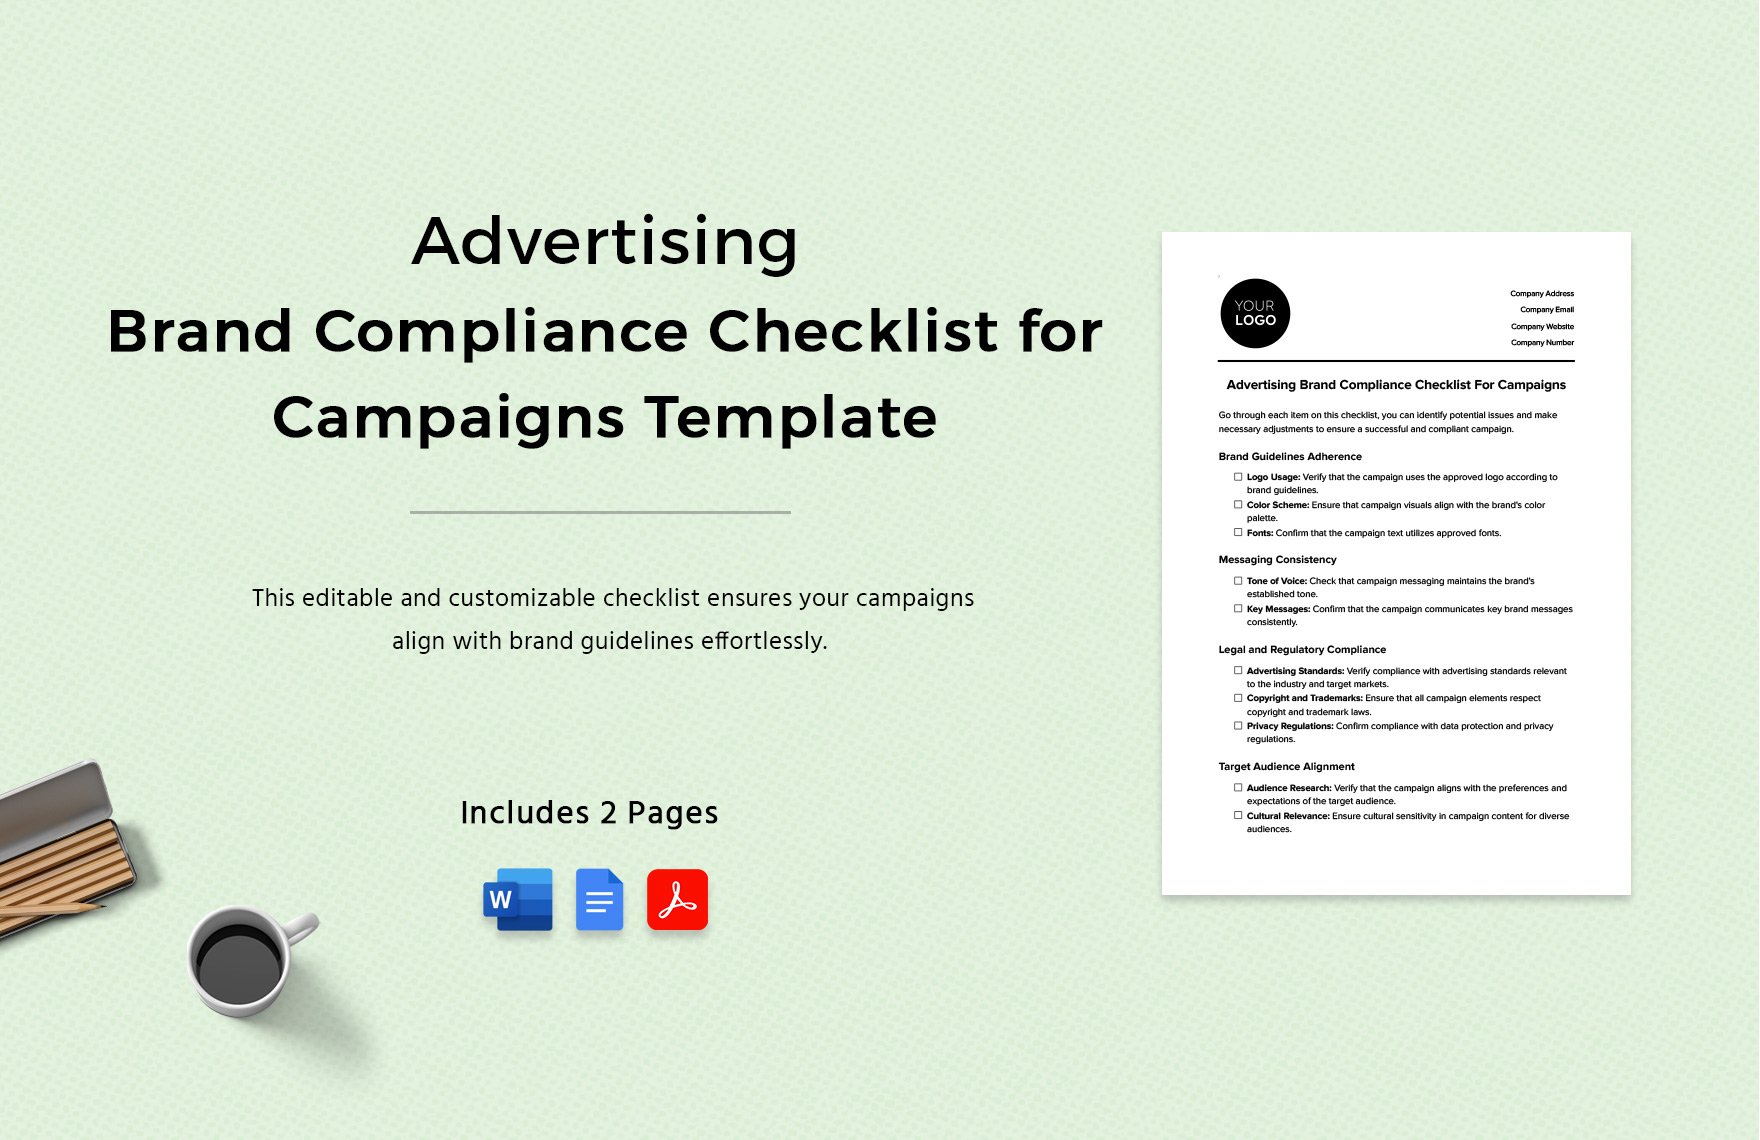 Advertising Brand Compliance Checklist for Campaigns Template